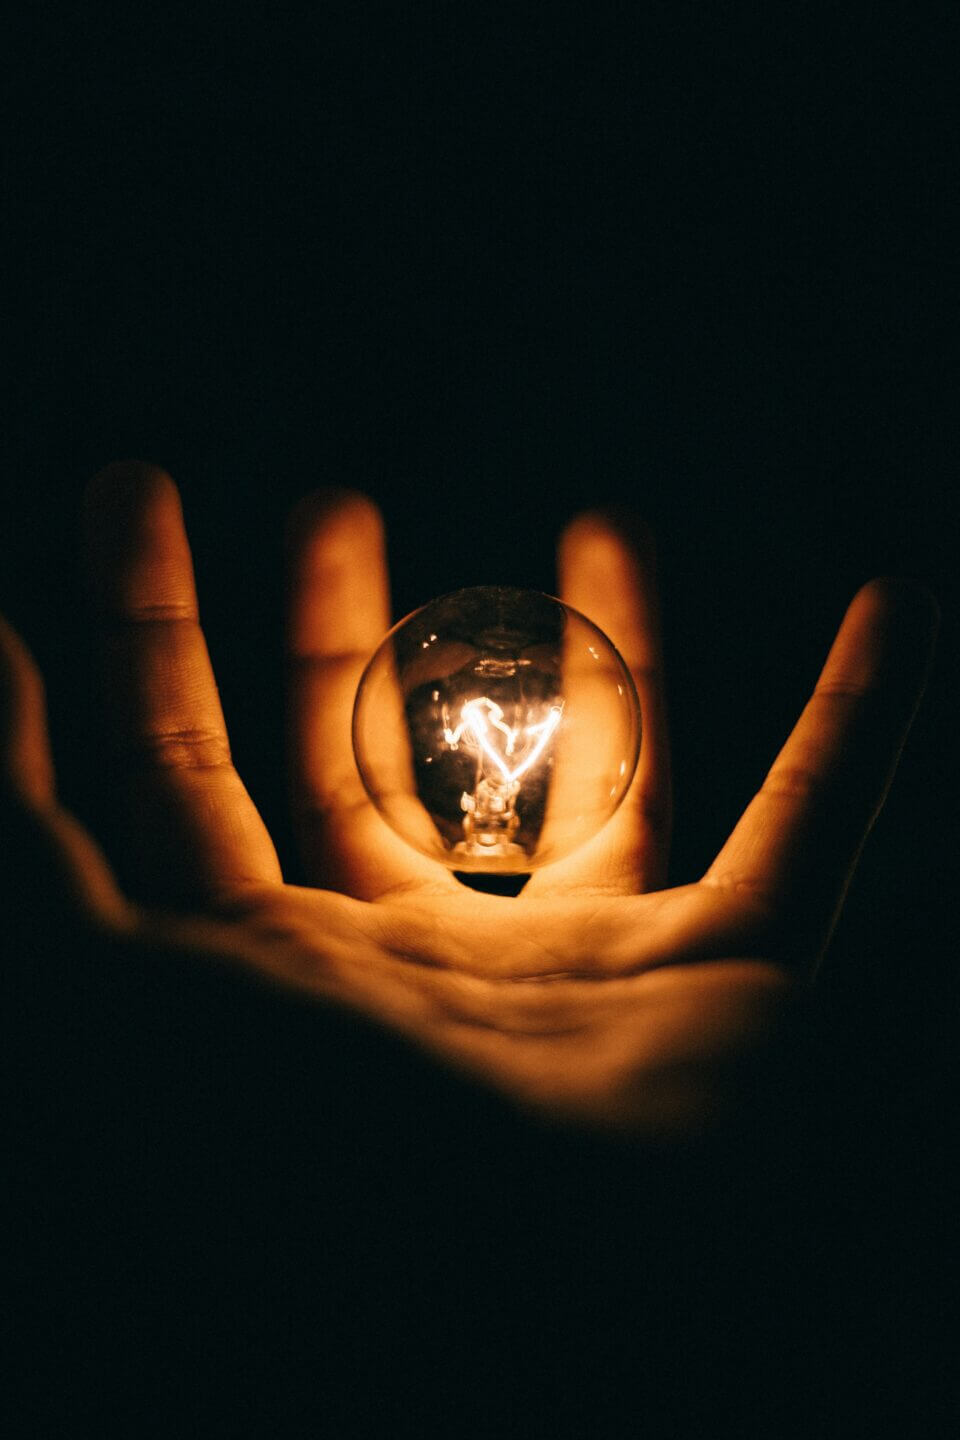 A close up of a person's hand. It is dark and the light bulb floating just above their open palm provides the only illumination.